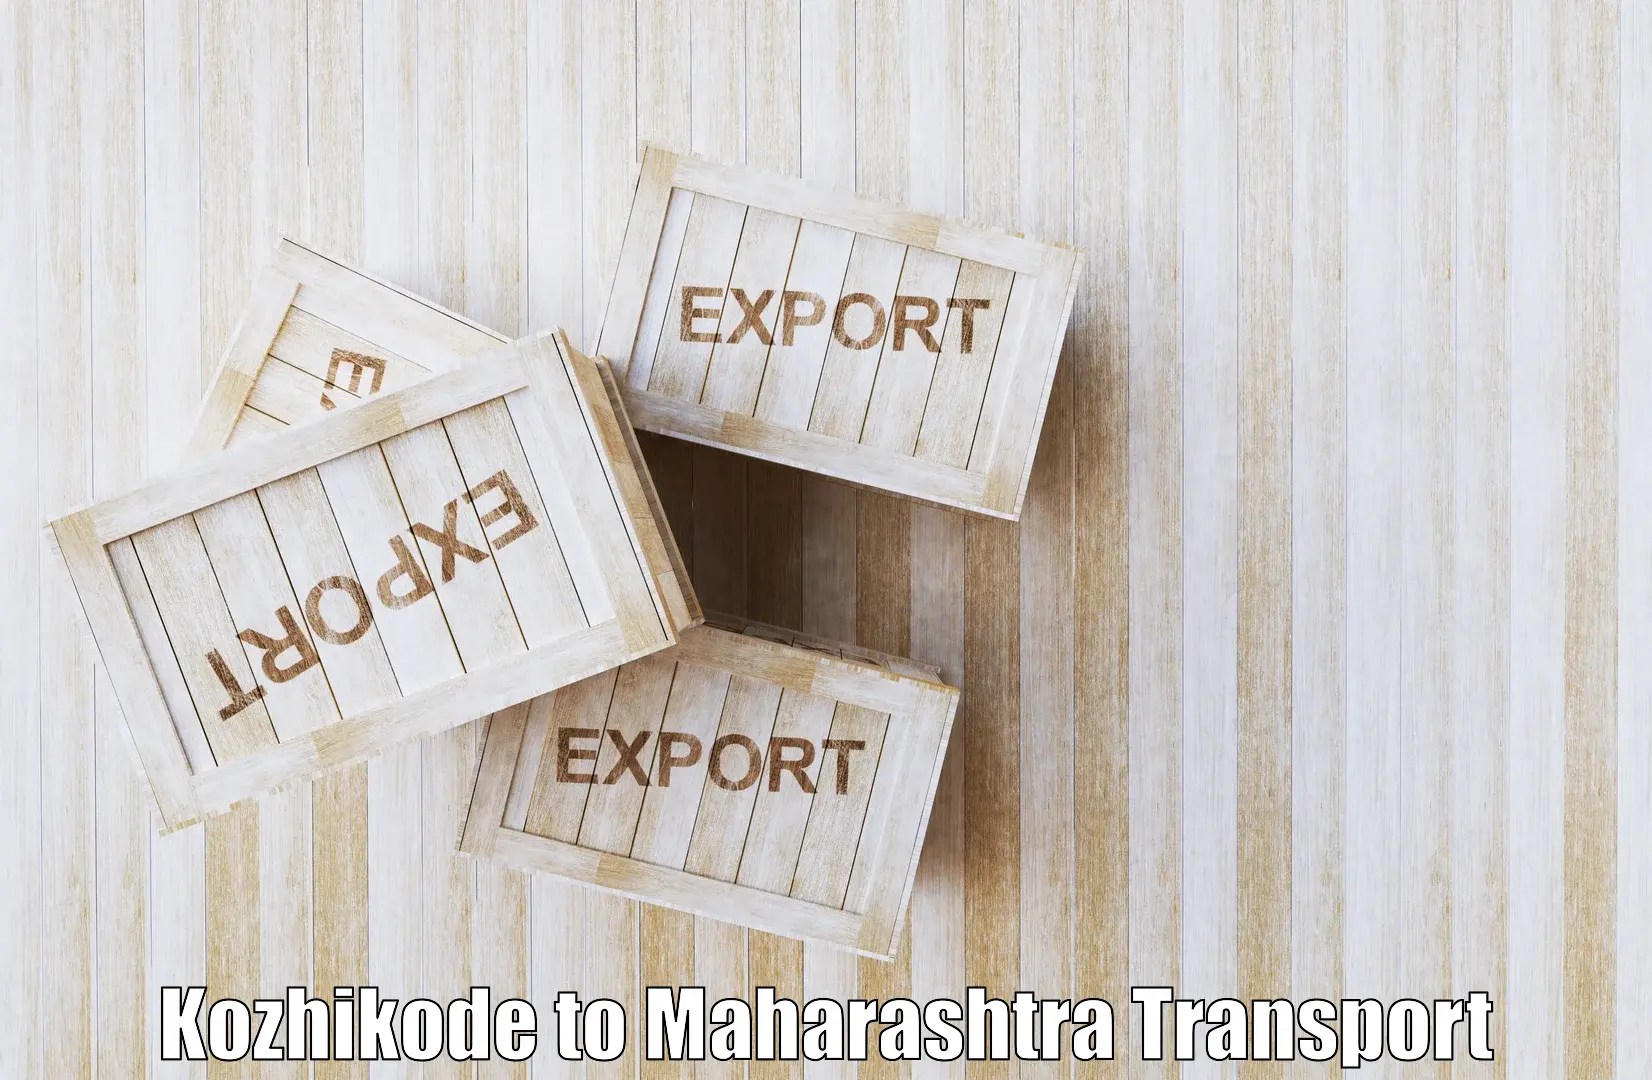 Road transport online services in Kozhikode to Raigarh Maharashtra